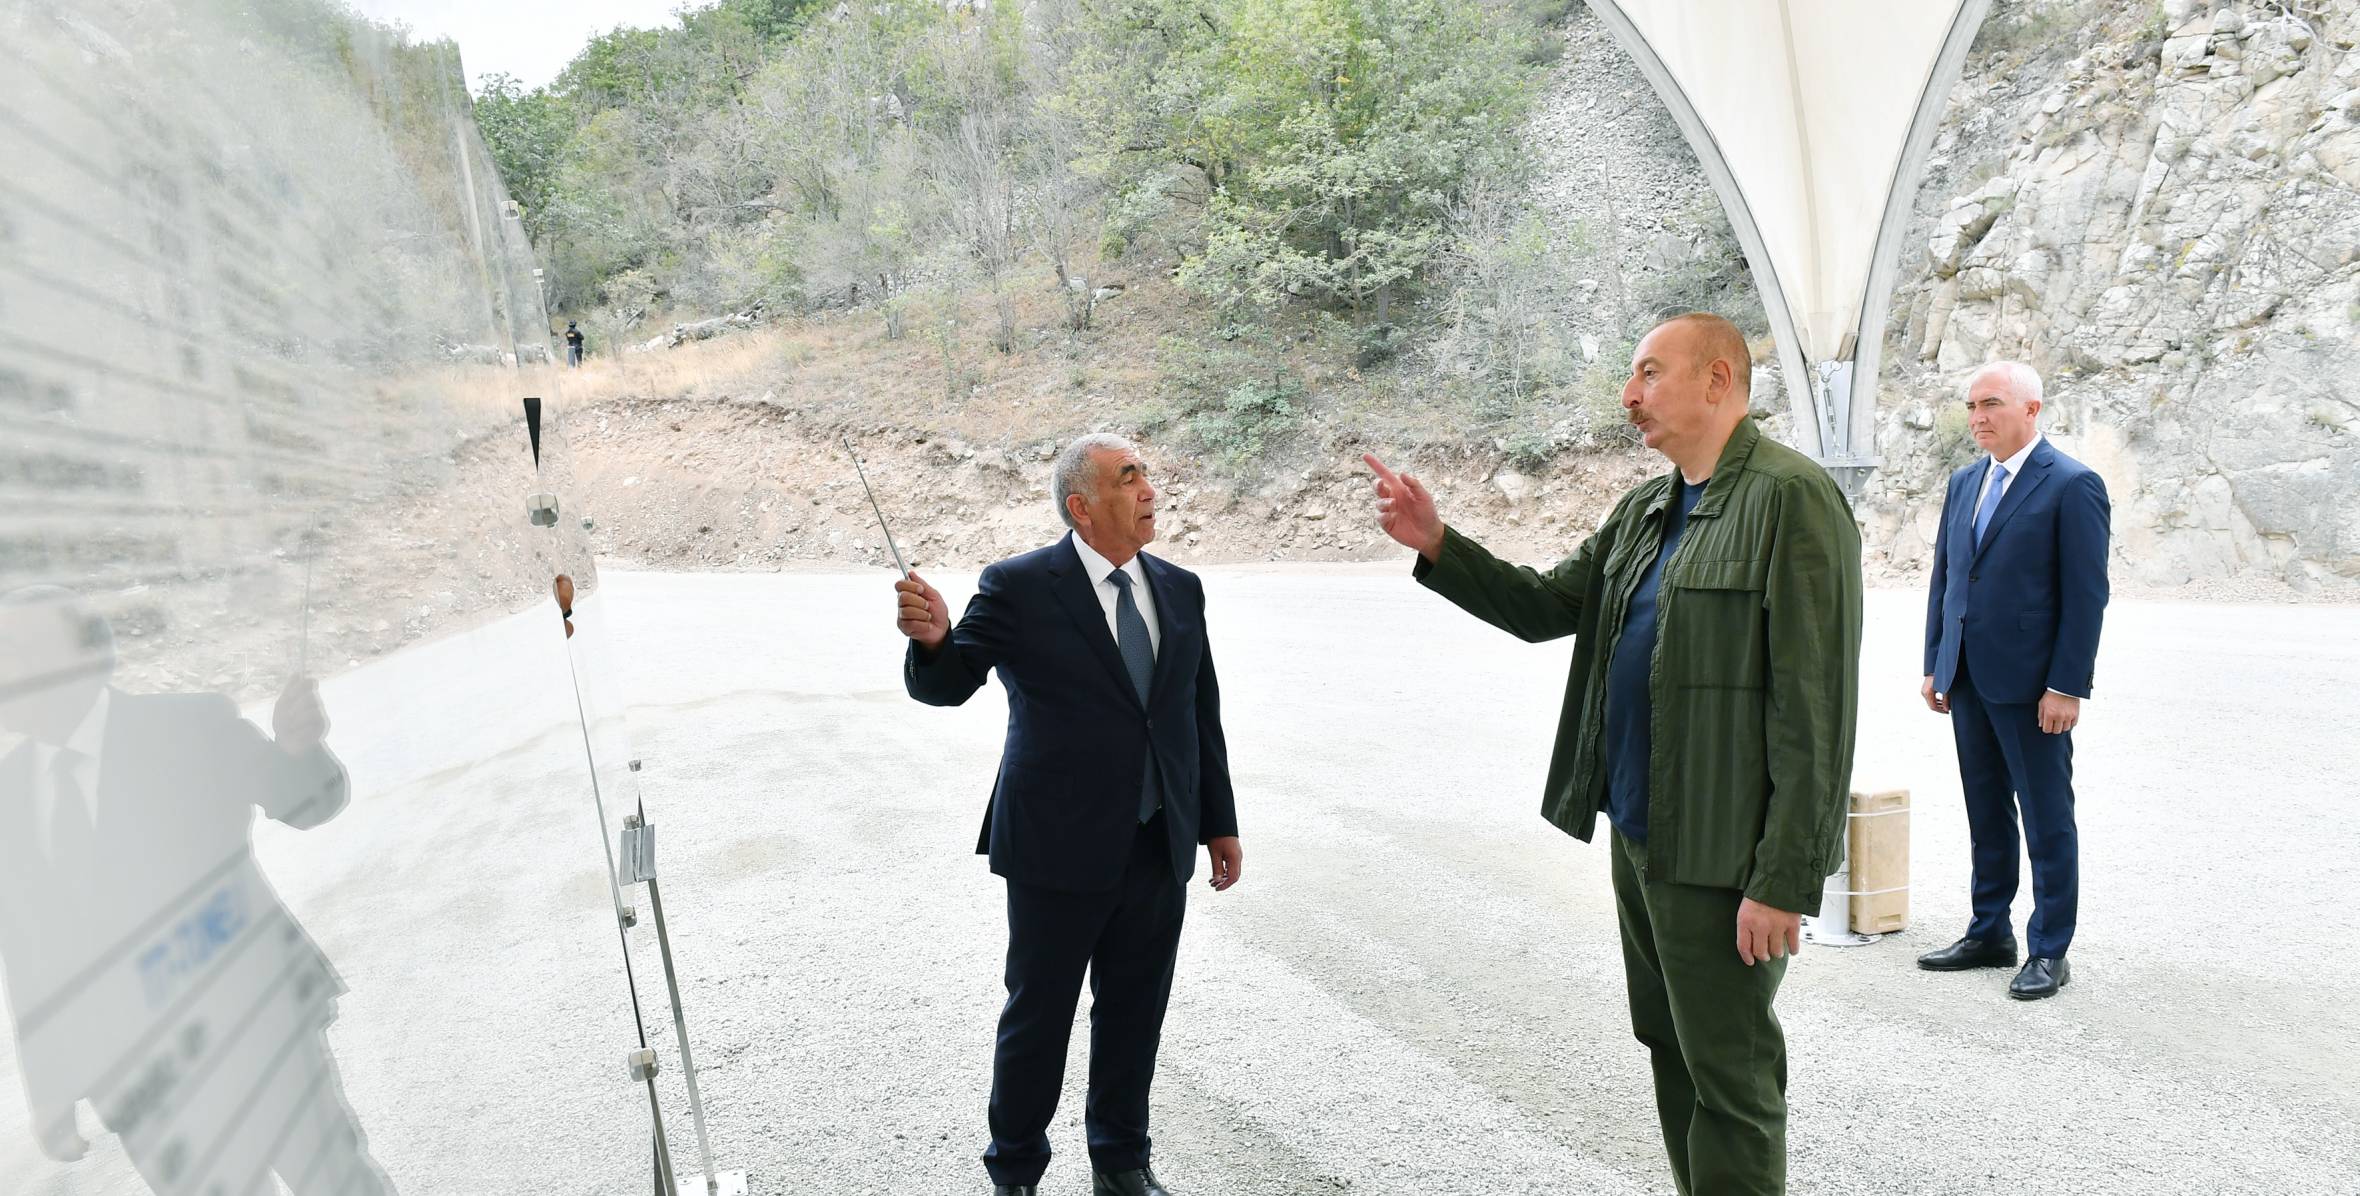 Ilham Aliyev viewed works carried out in 38-76 kilometer section of the Kalbadjar-Lachin highway